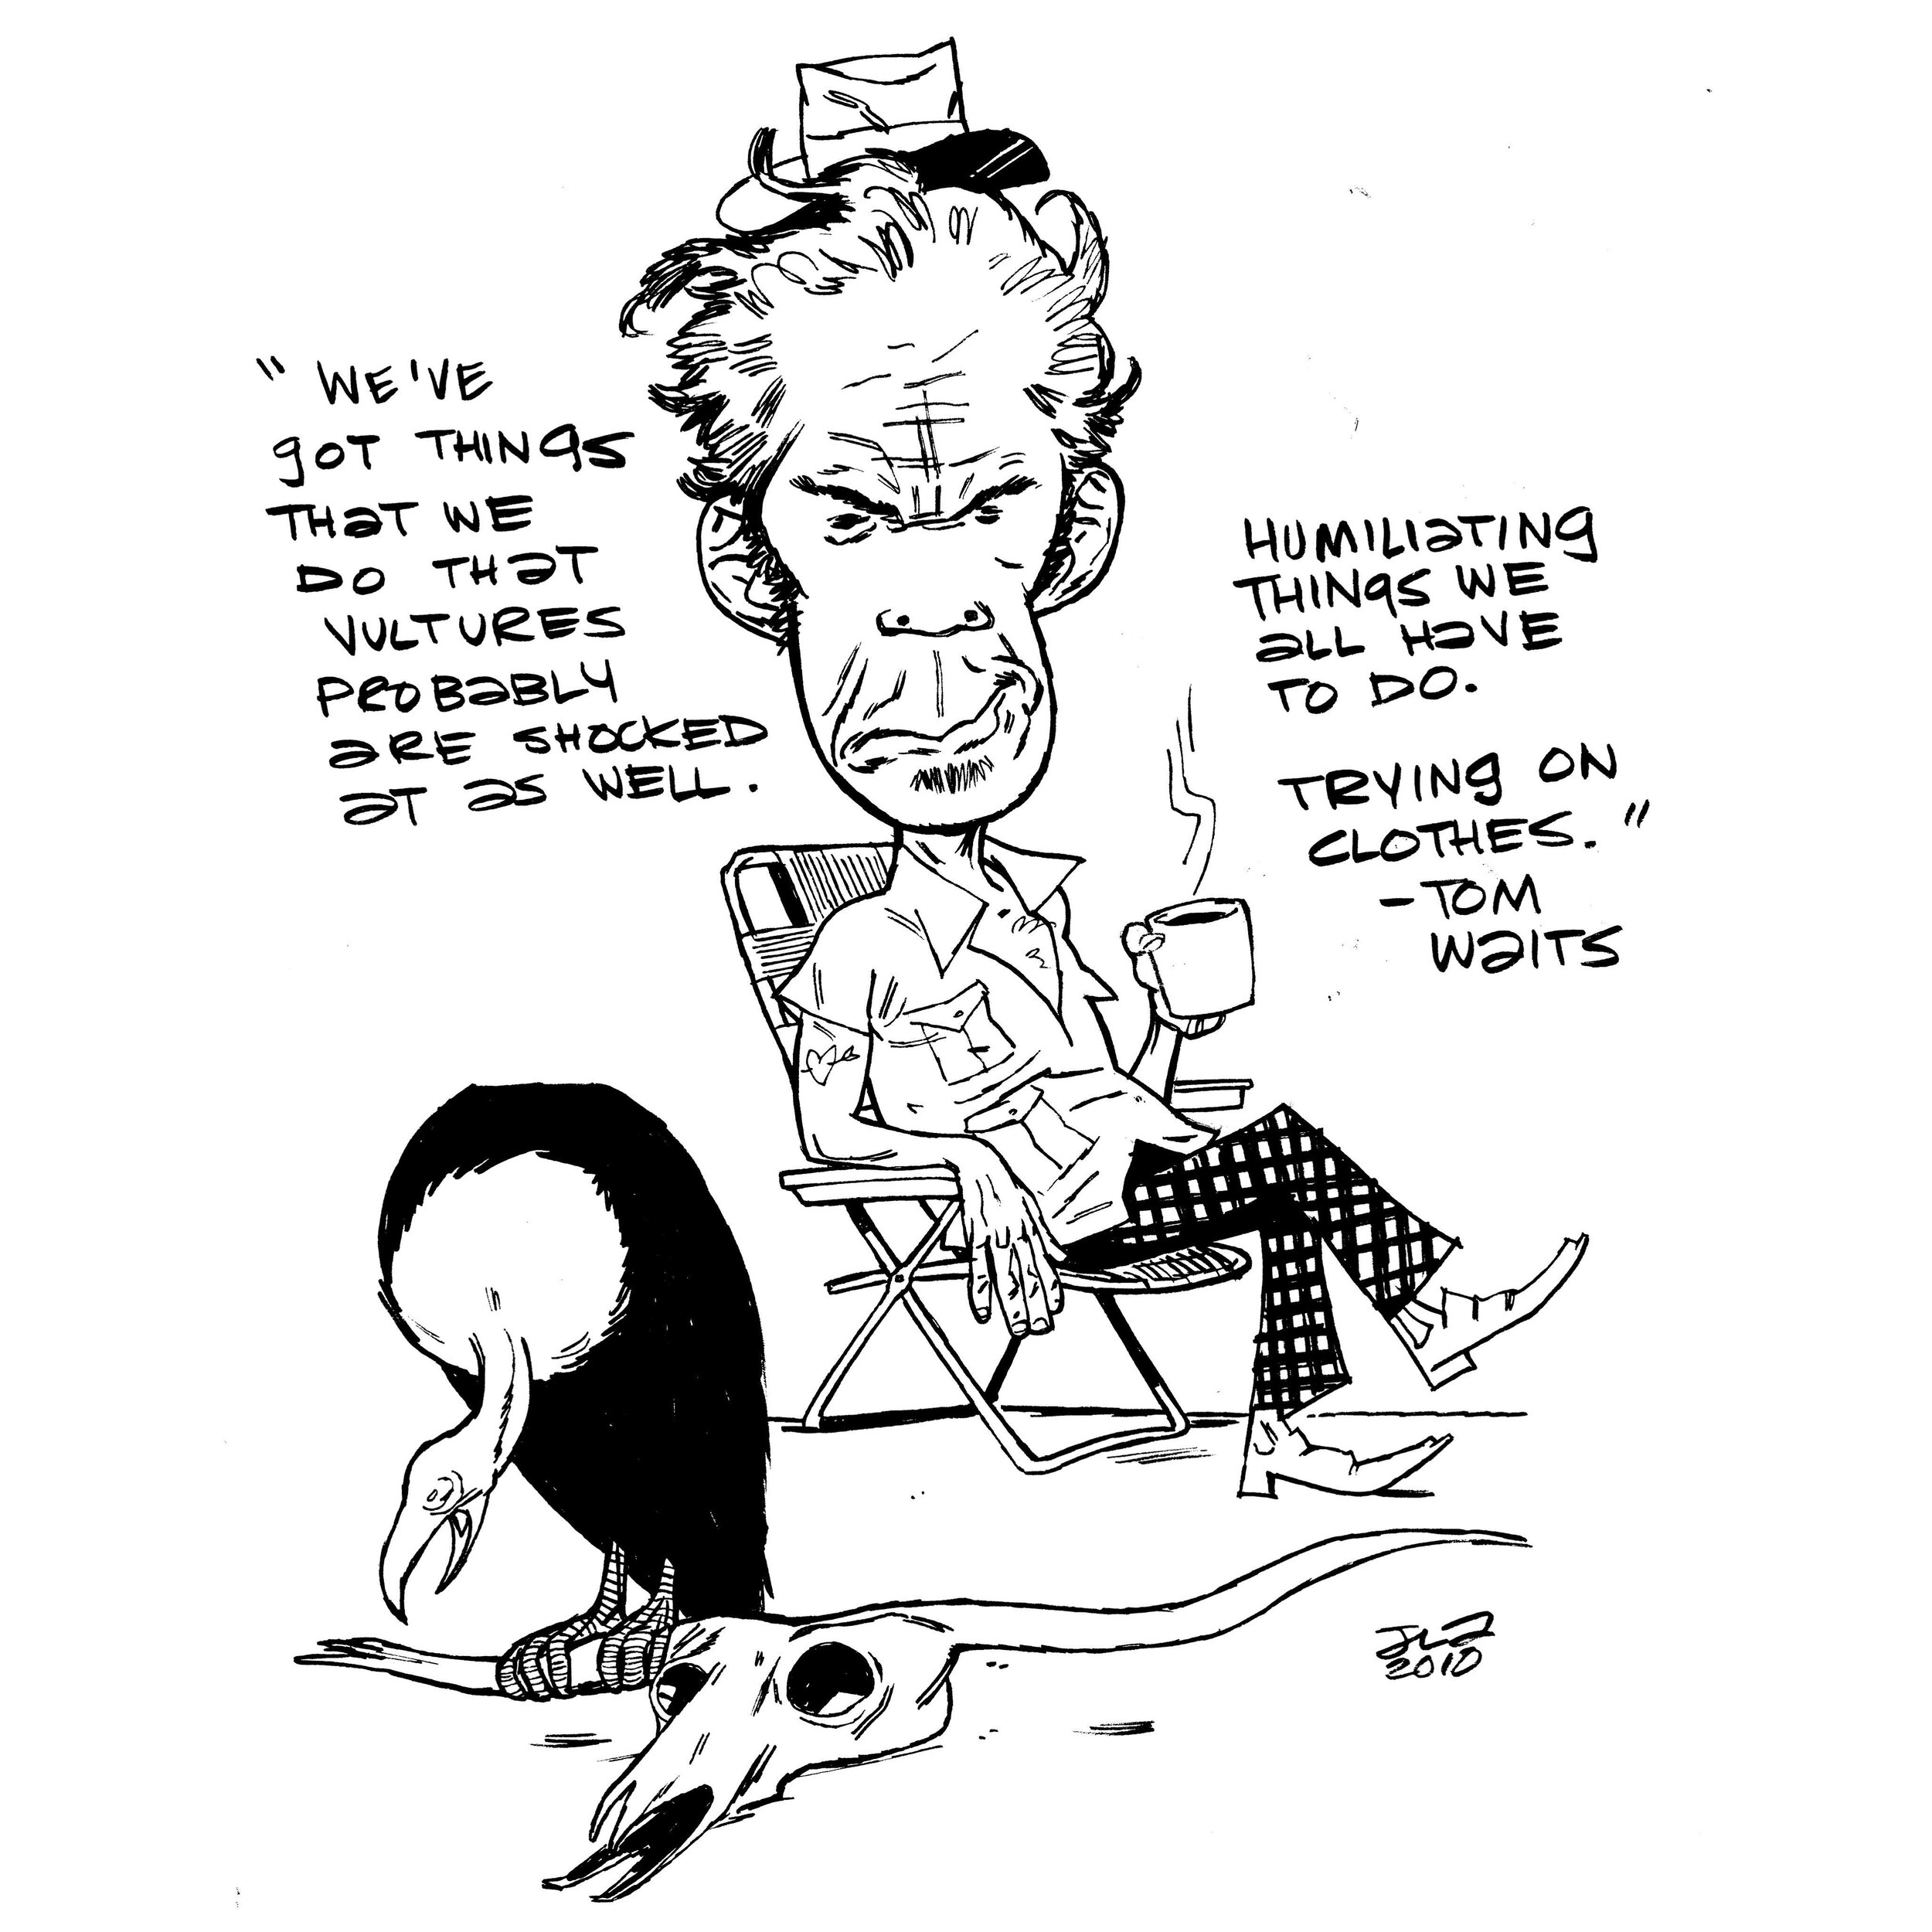 And old Tom Waits commission. The quote is real. 

For comics &amp; more read/join my NEWSLETTER at the link in bio. 

#comics #comicbooks #cartoonist #tomwaits #music #cartoonist #caricature